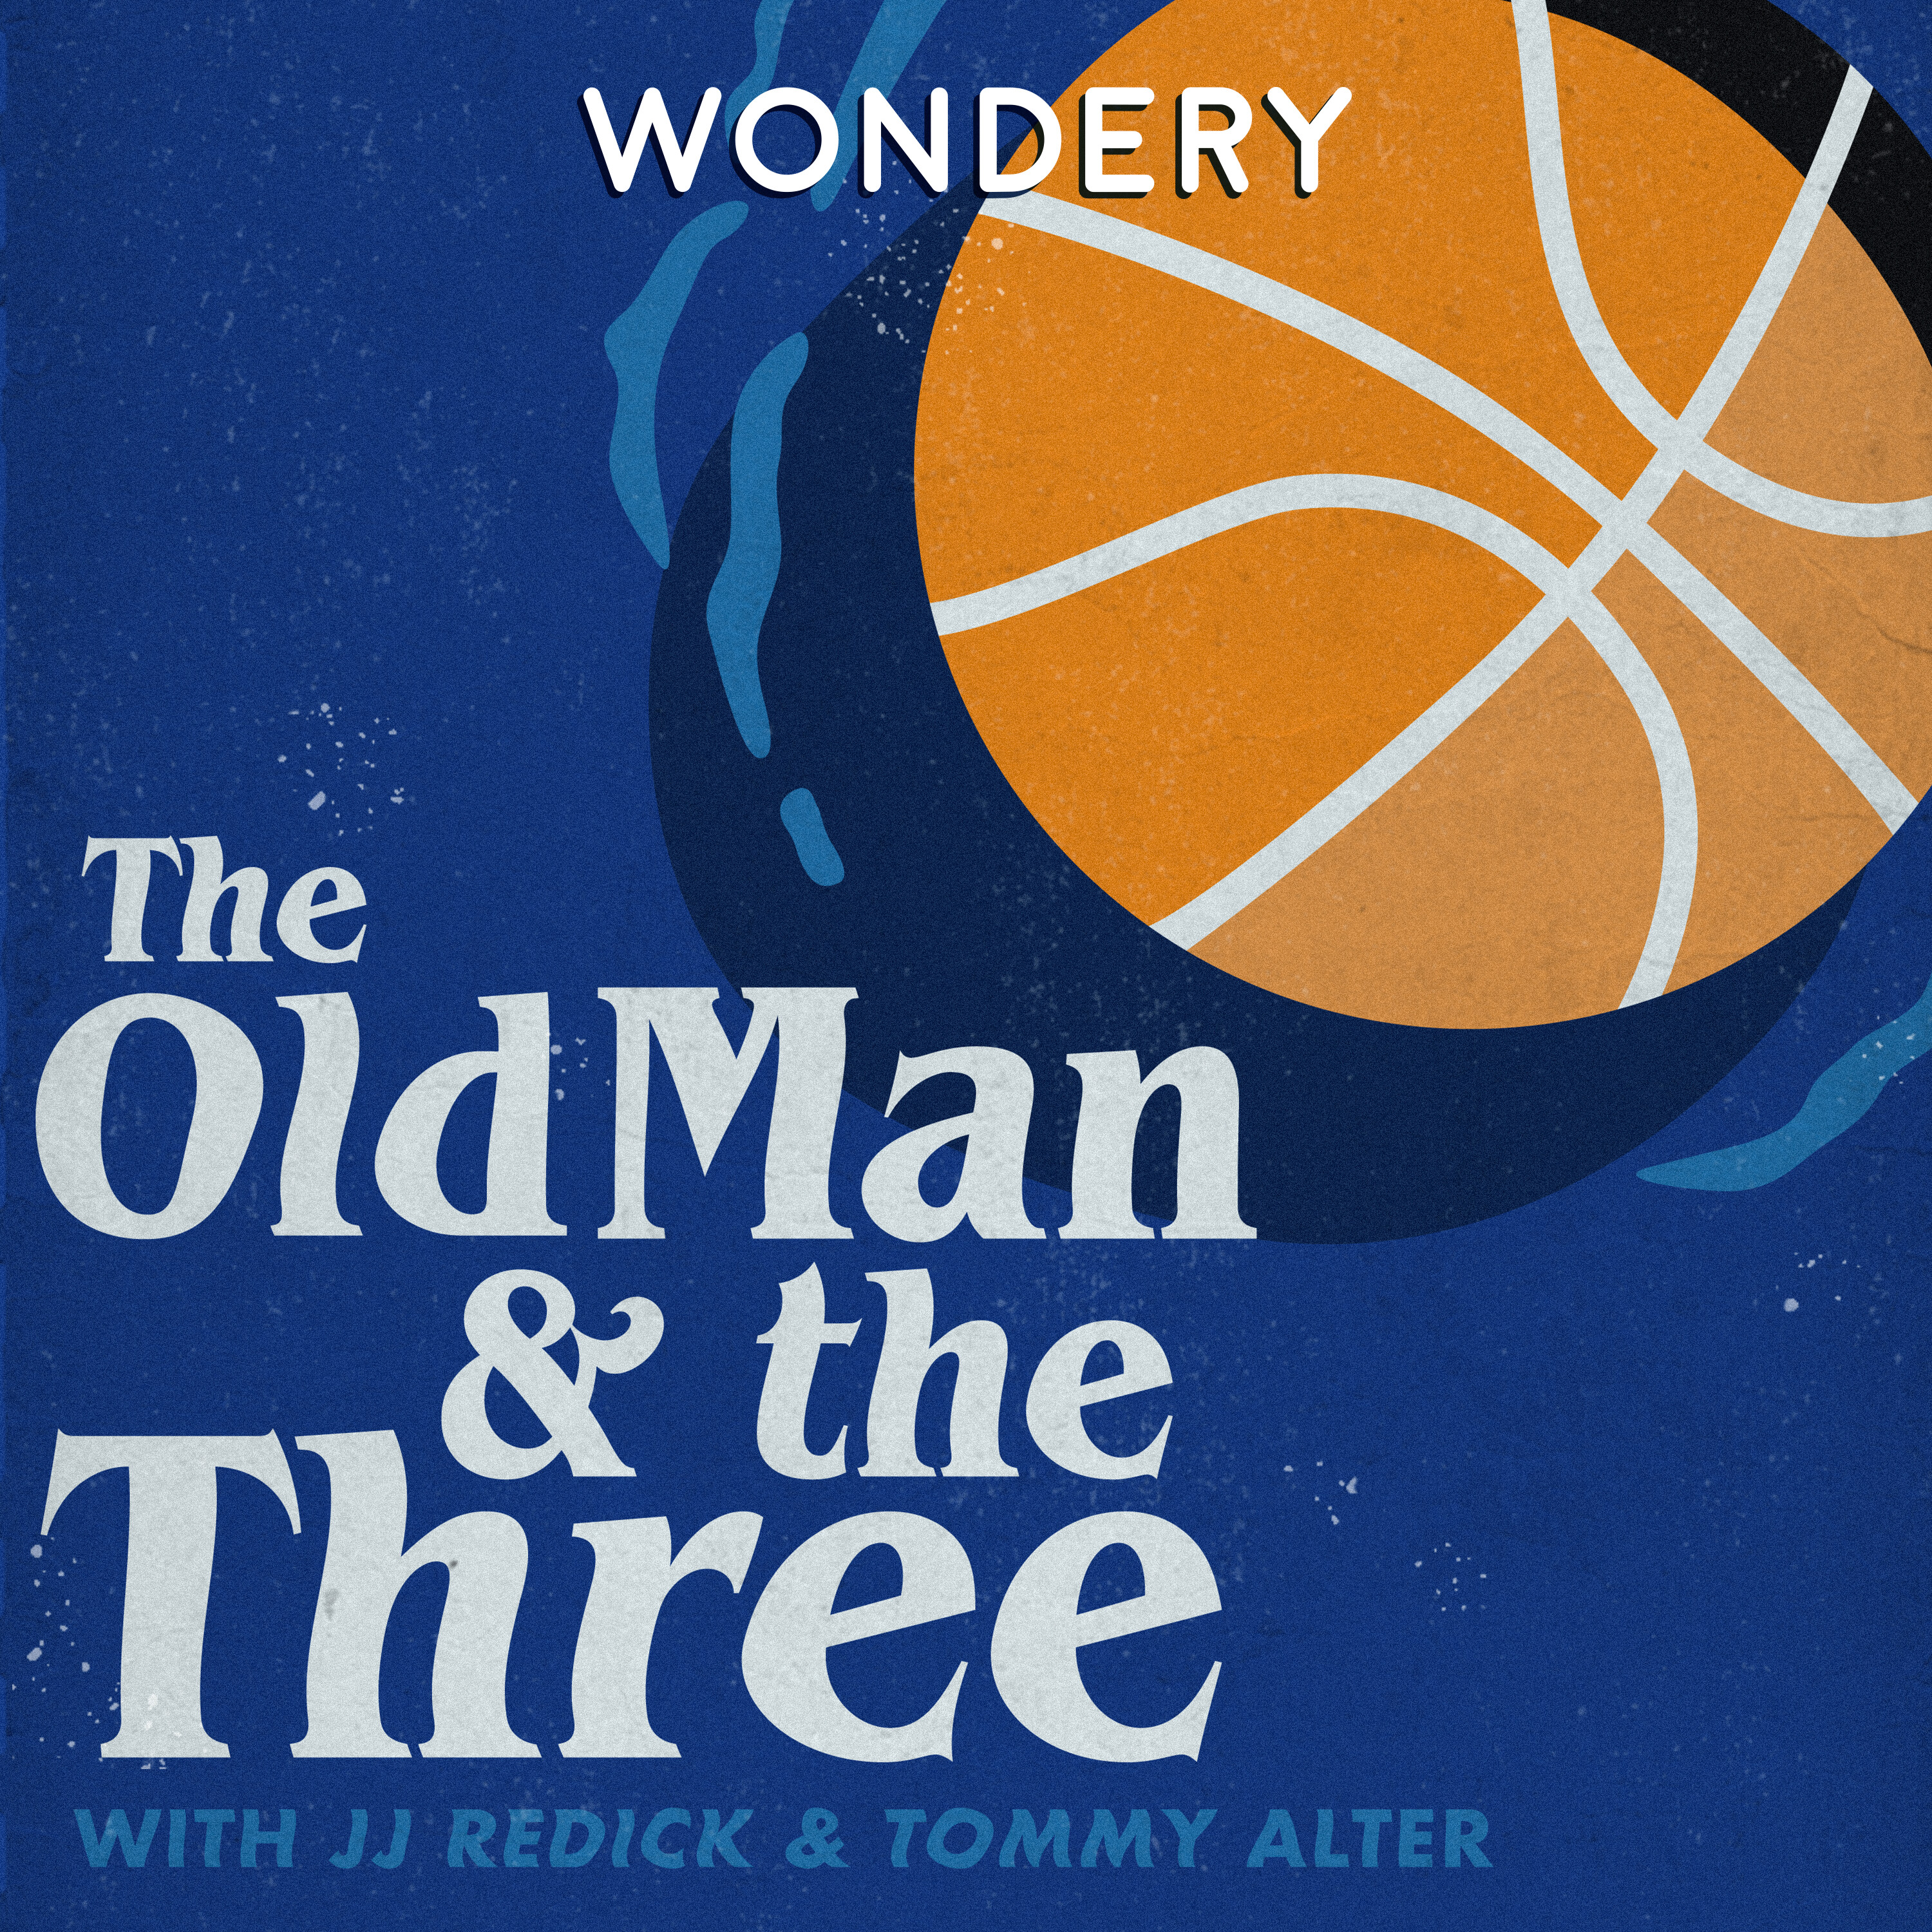 The Old Man and the Three with JJ Redick and Tommy Alter podcast show image